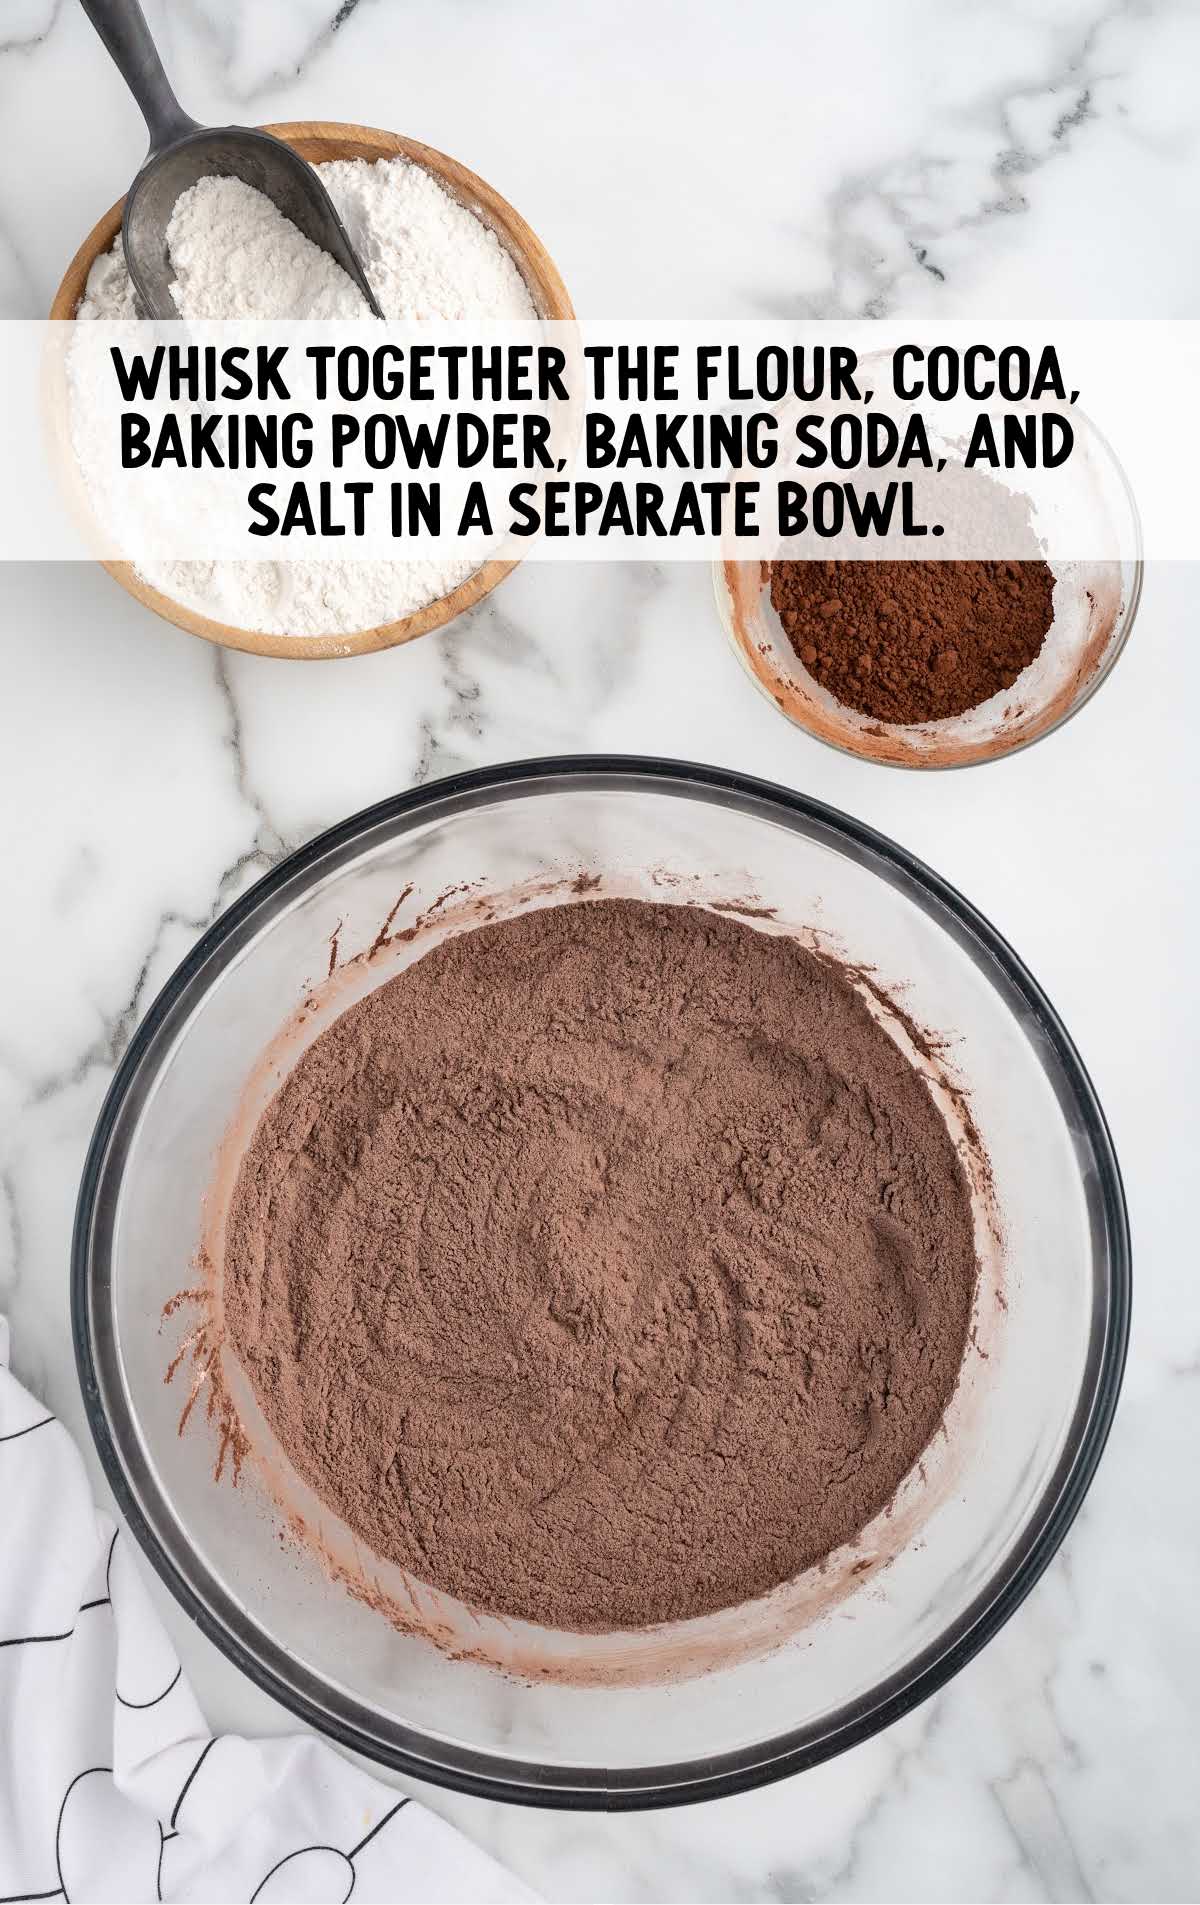 all-purpose flour, unsweetened cocoa powder, baking powder, baking soda, and salt combined in a bowl